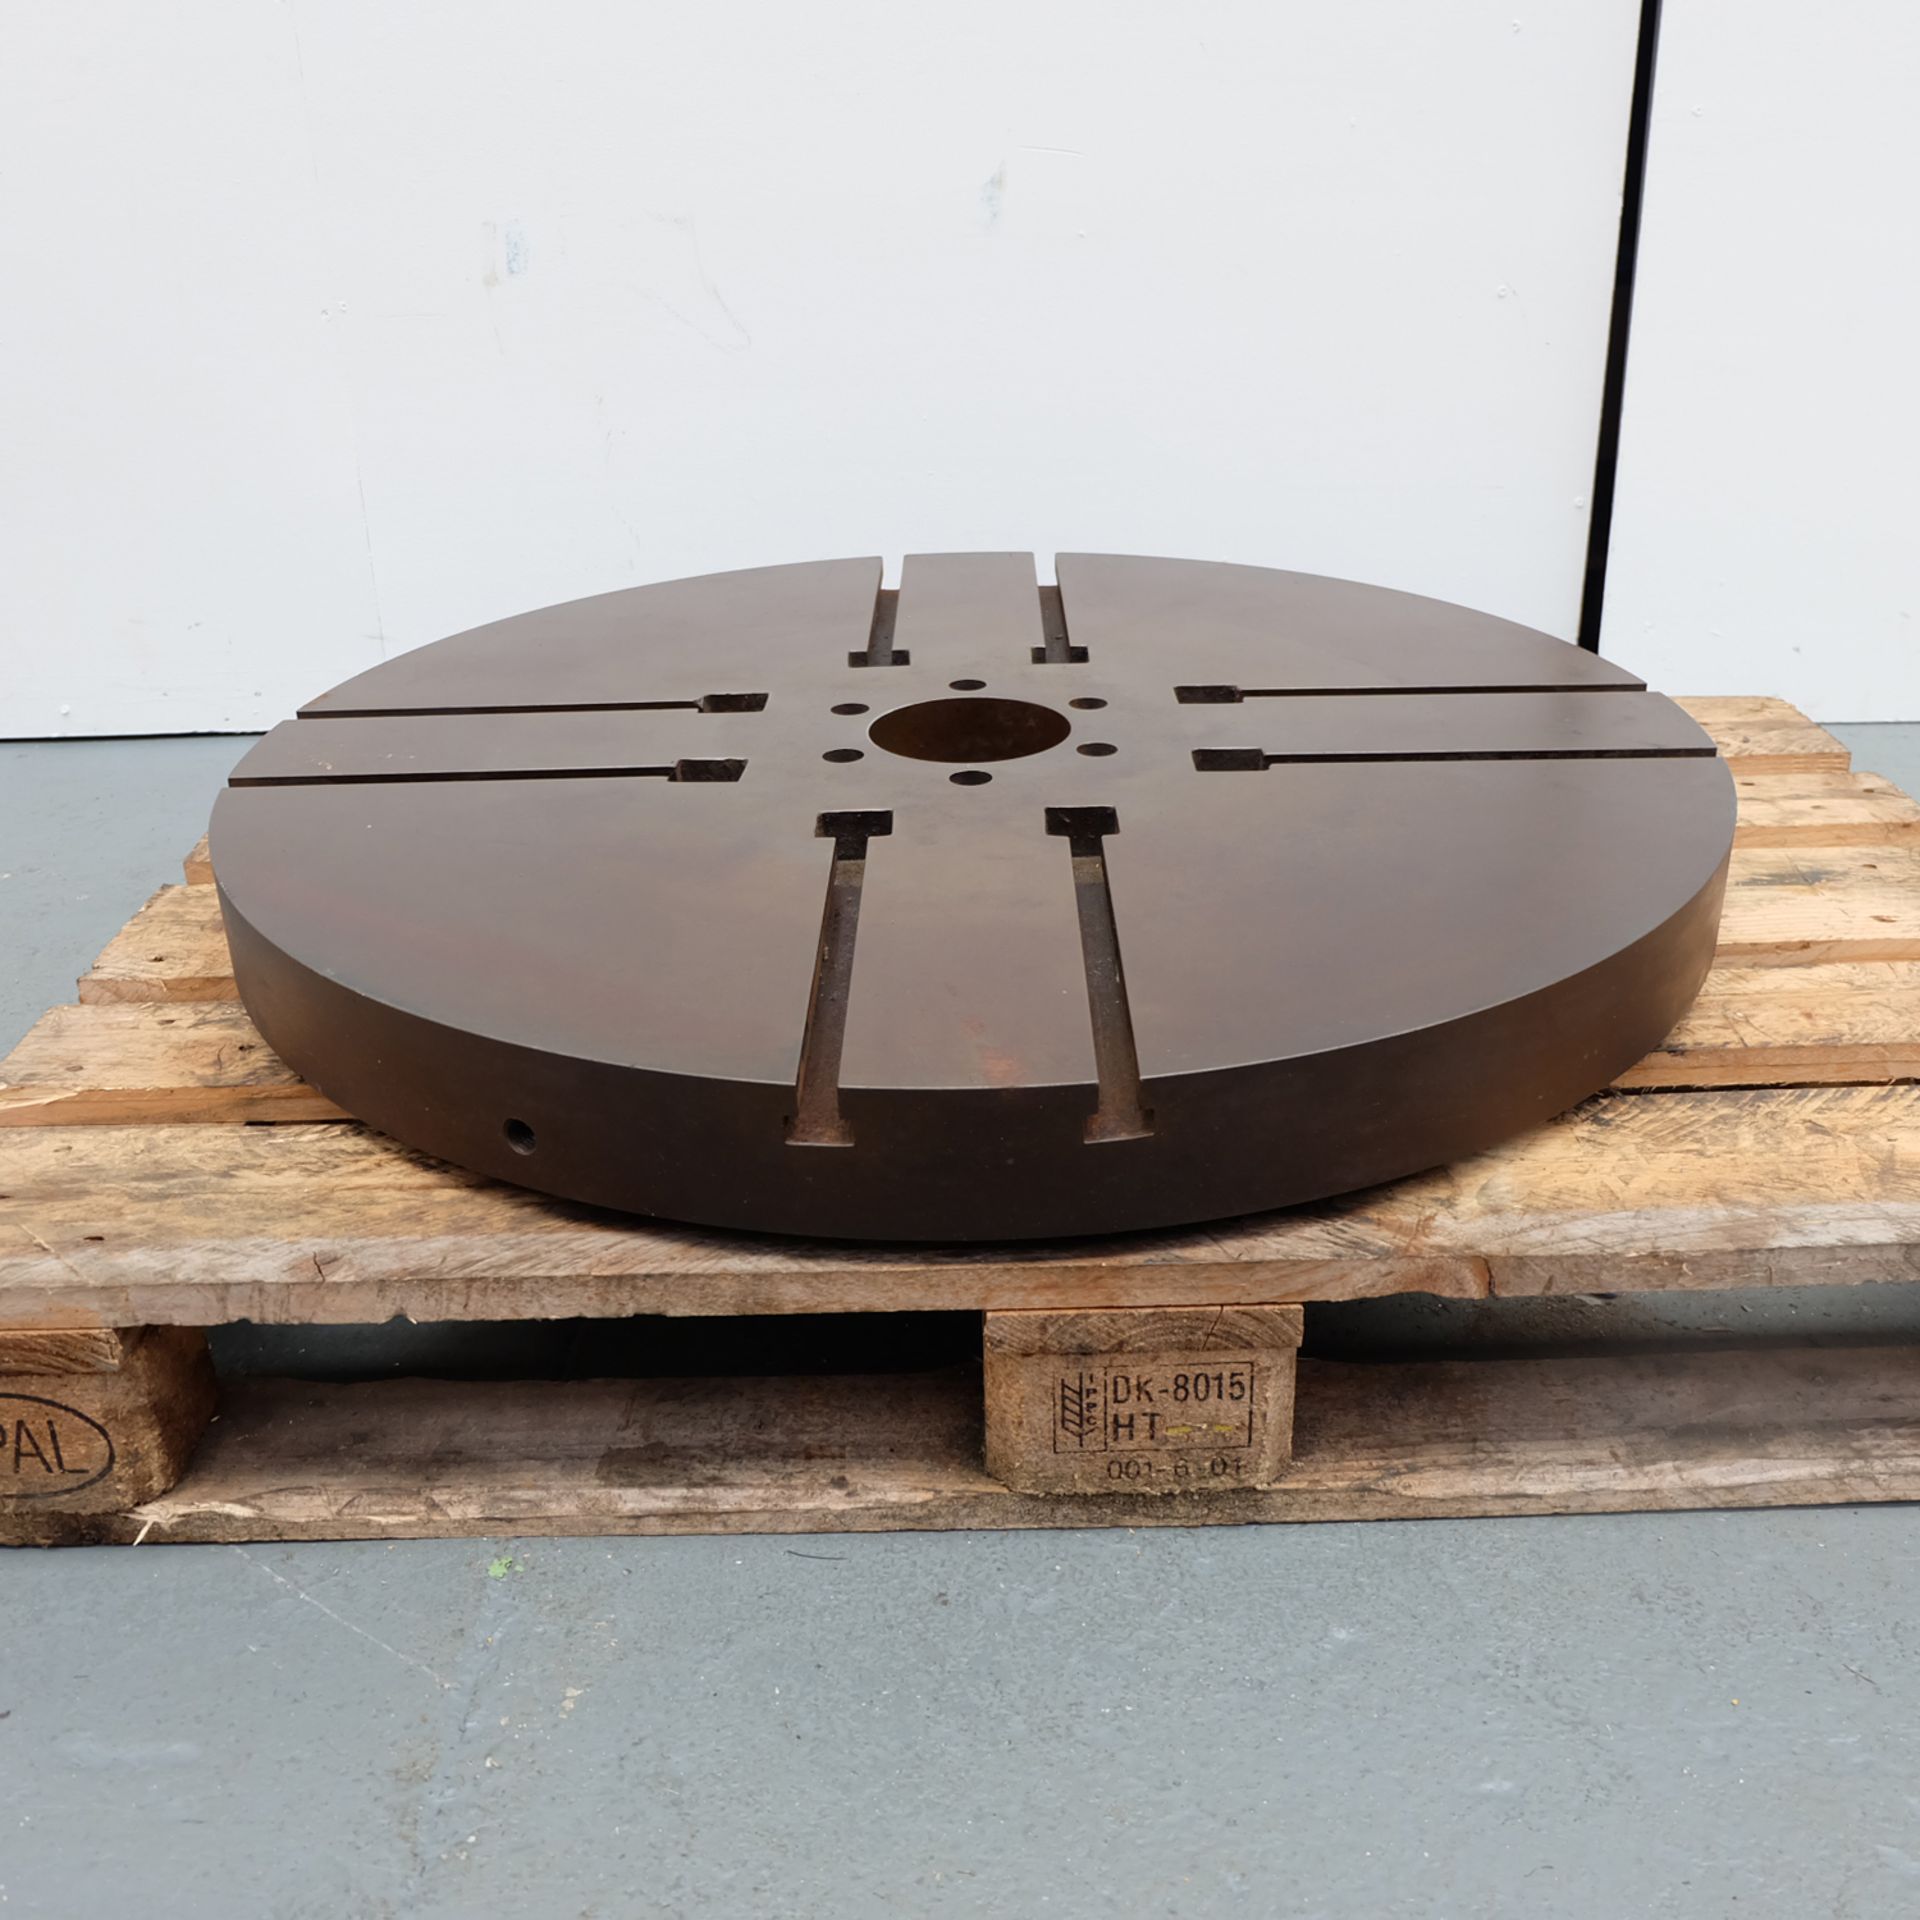 Tee Slotted Face Plate. 36" Diameter. 3" Width. 5" Bore. - Image 6 of 7